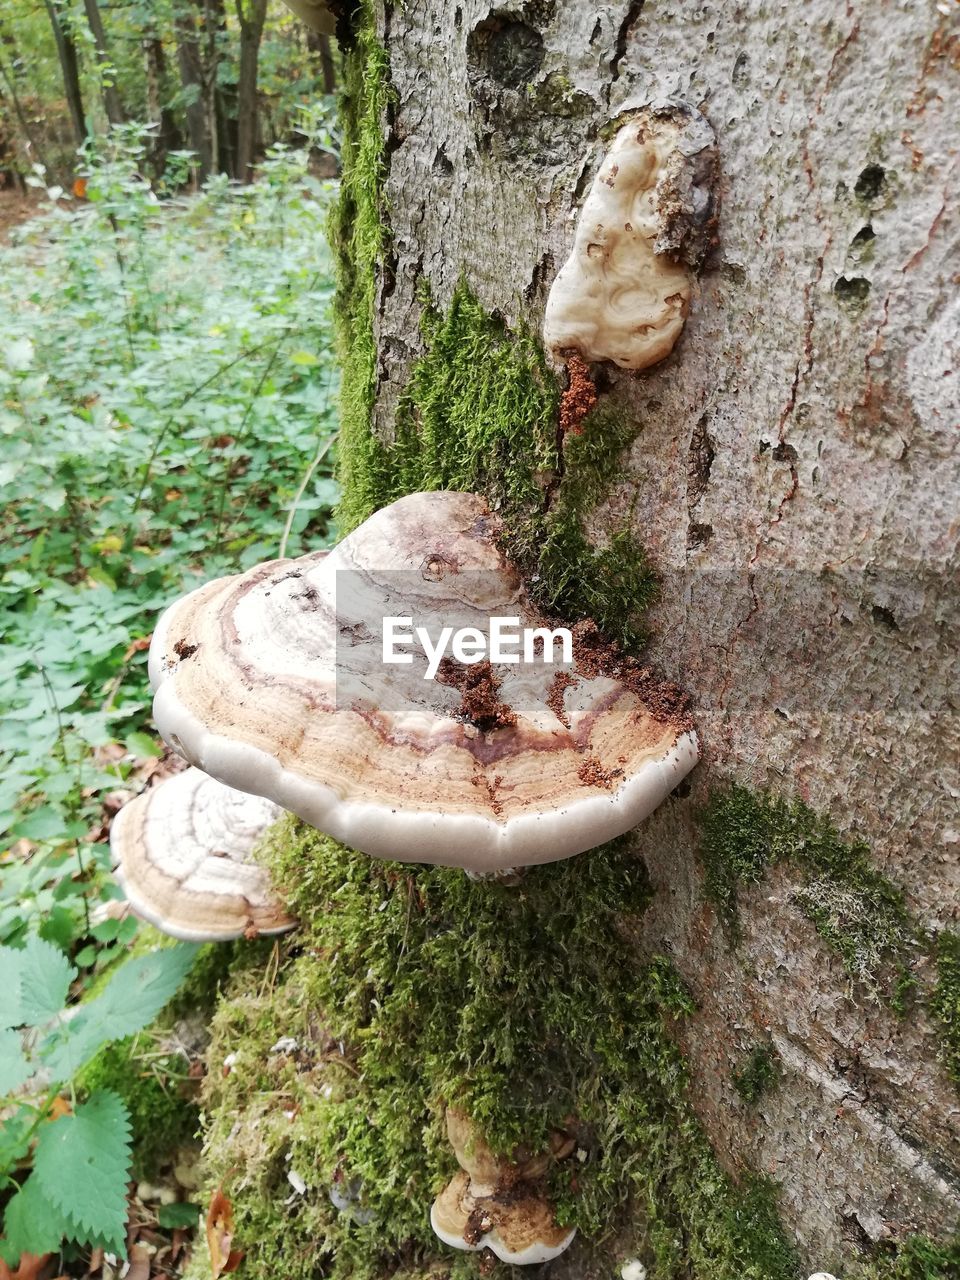 HIGH ANGLE VIEW OF MUSHROOMS ON TREE TRUNK